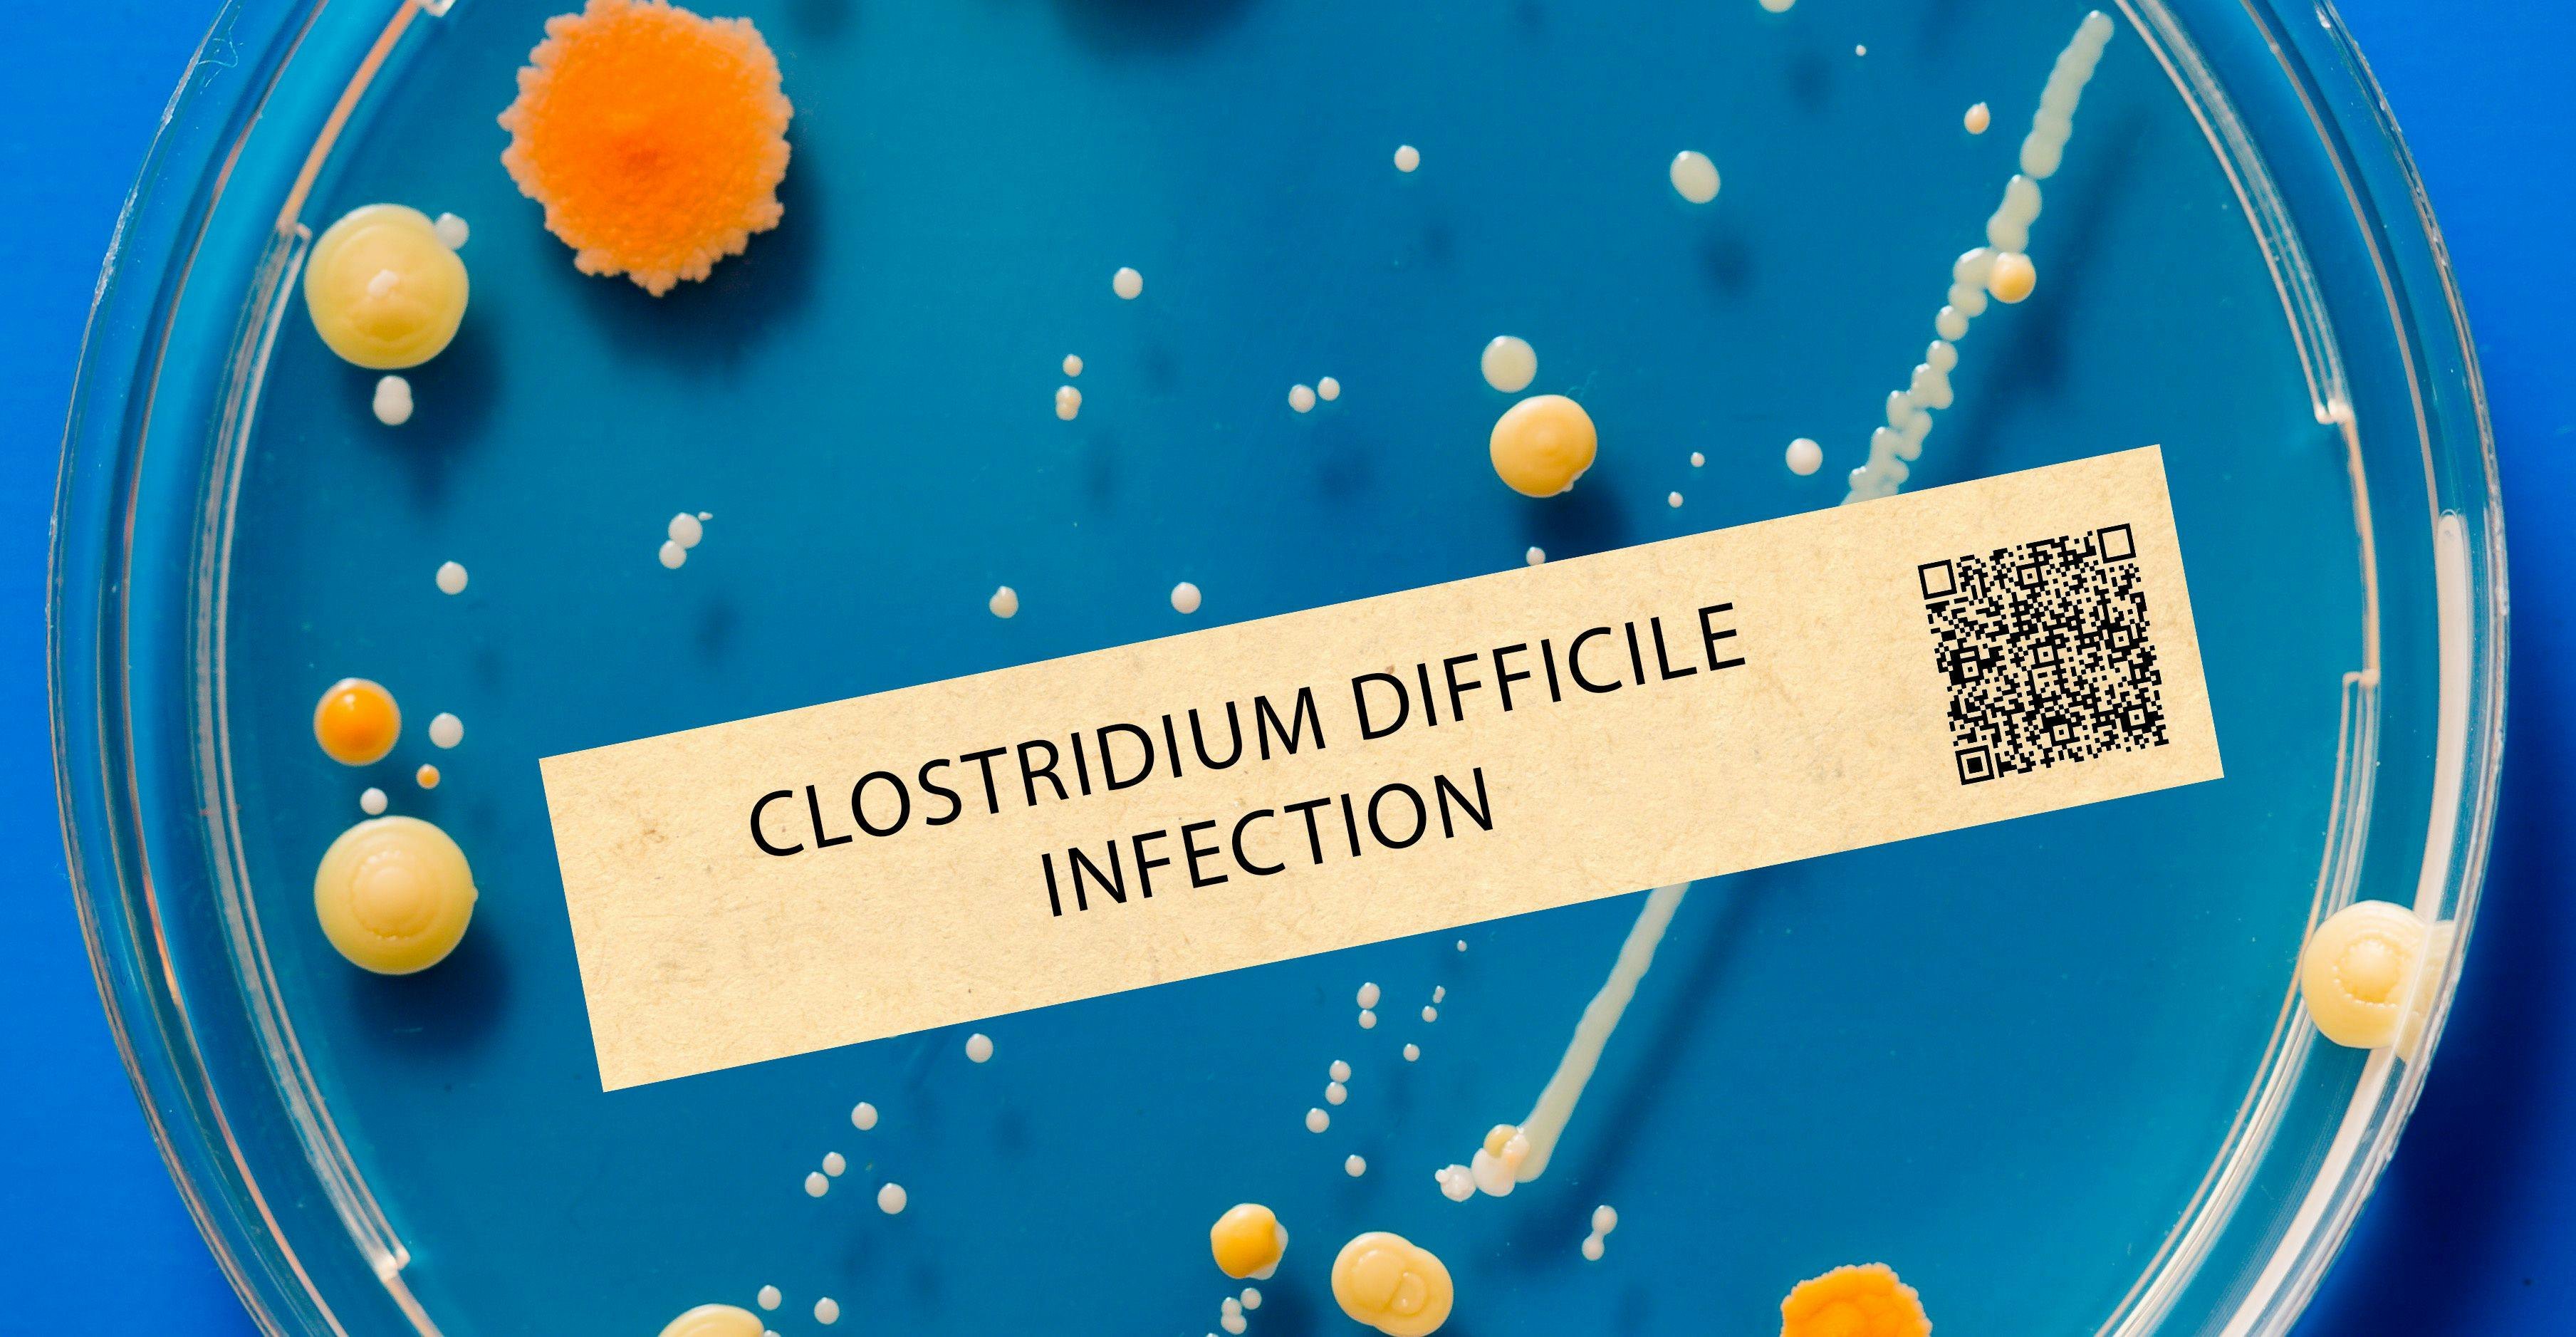 Clostridium difficile infection - Bacterial infection that can cause severe diarrhea and inflammation of the colon. Credit: luchschenF - stock.adobe.com.